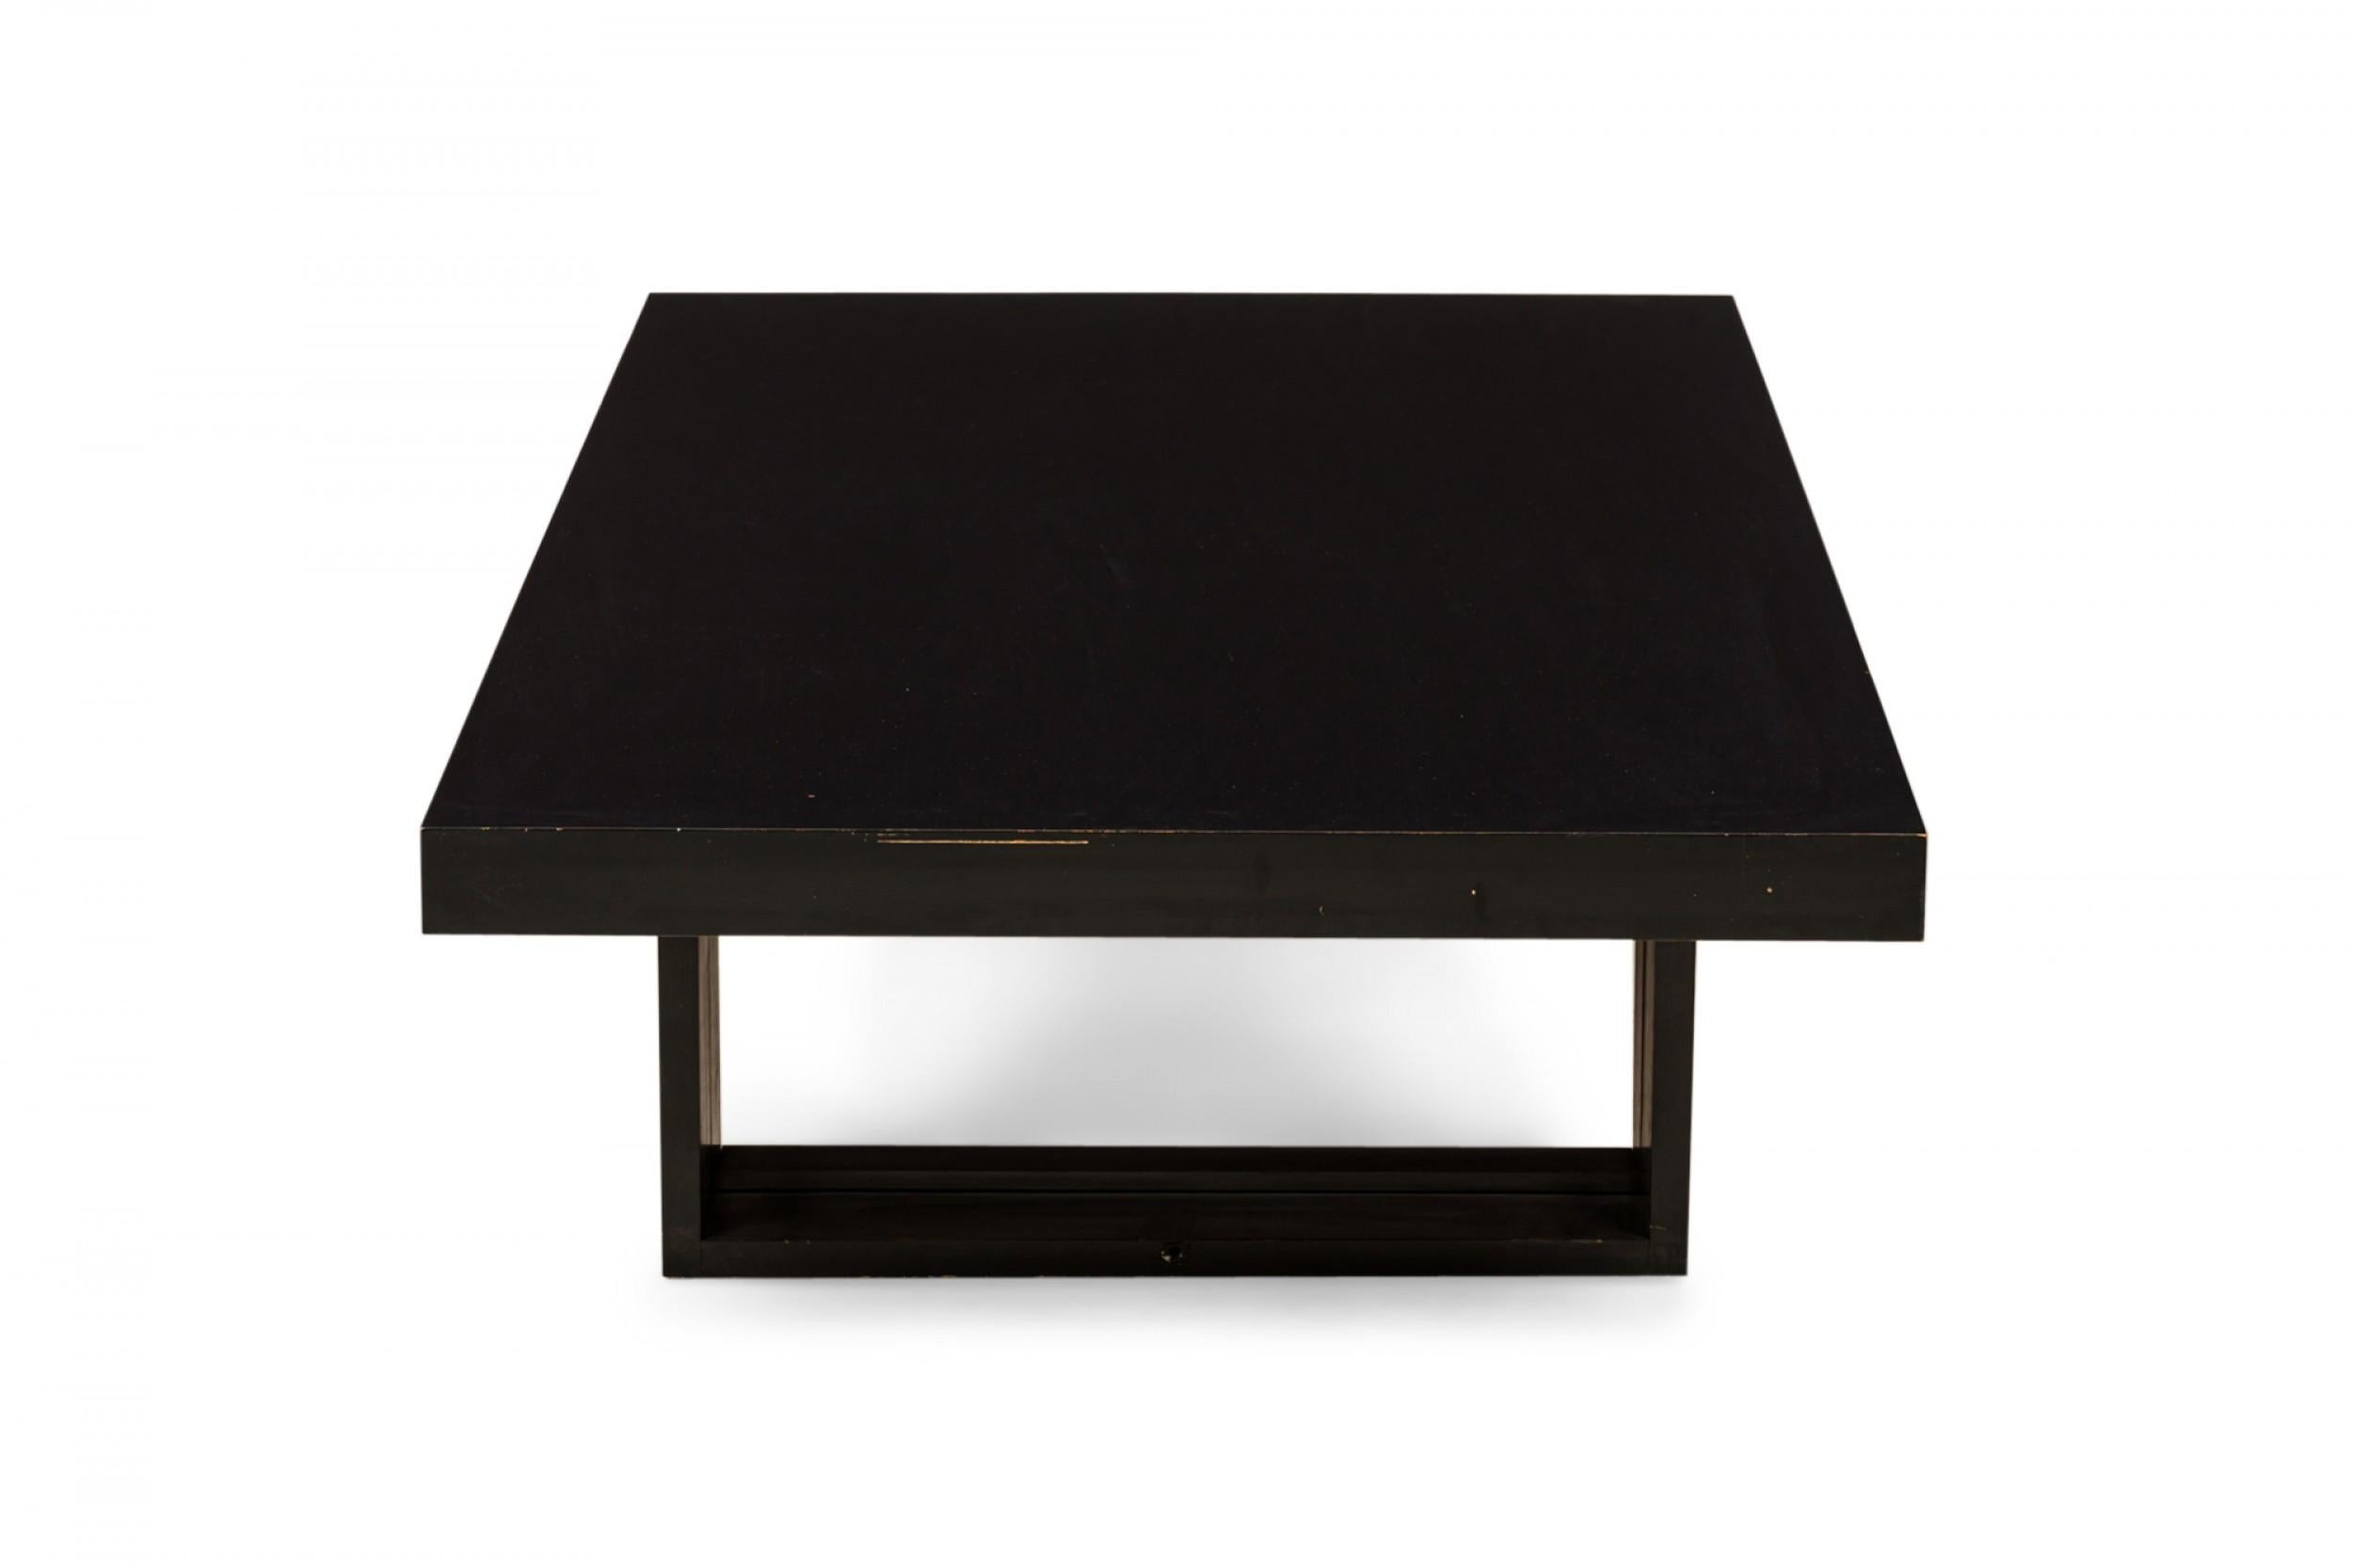 Van Keppel Green VKG Ebonized Convertible Dining Table / Coffee Table In Good Condition For Sale In New York, NY